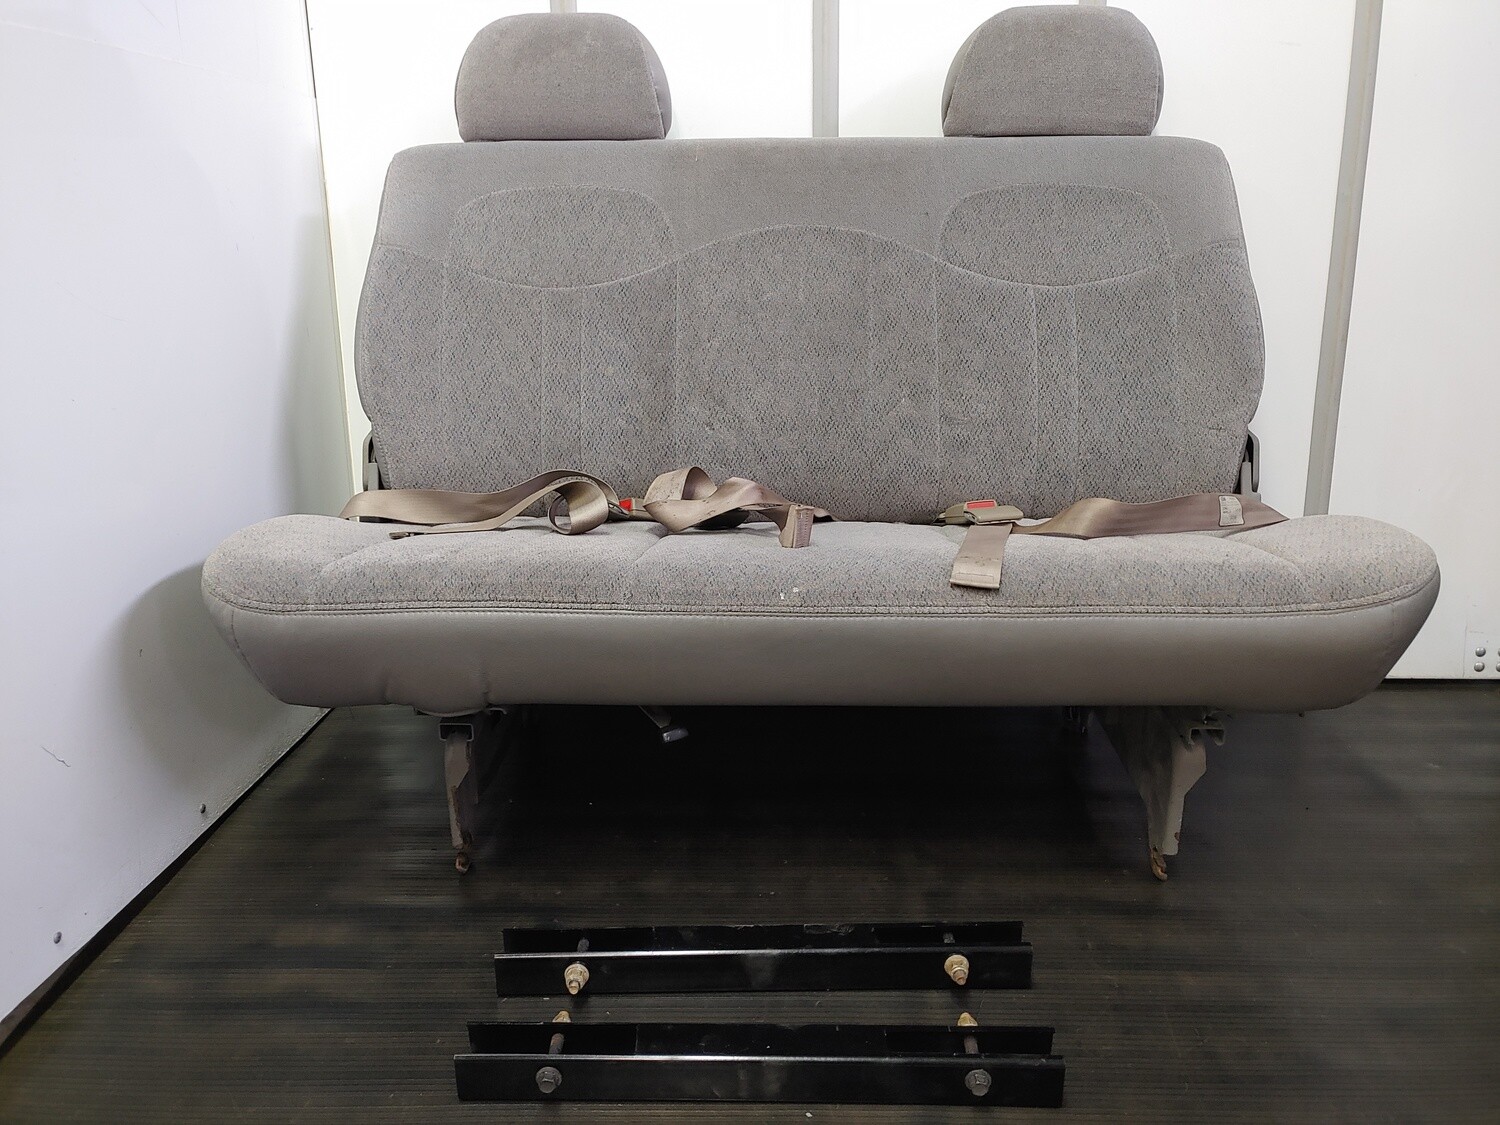 3 Passenger Bench Seat - Removable